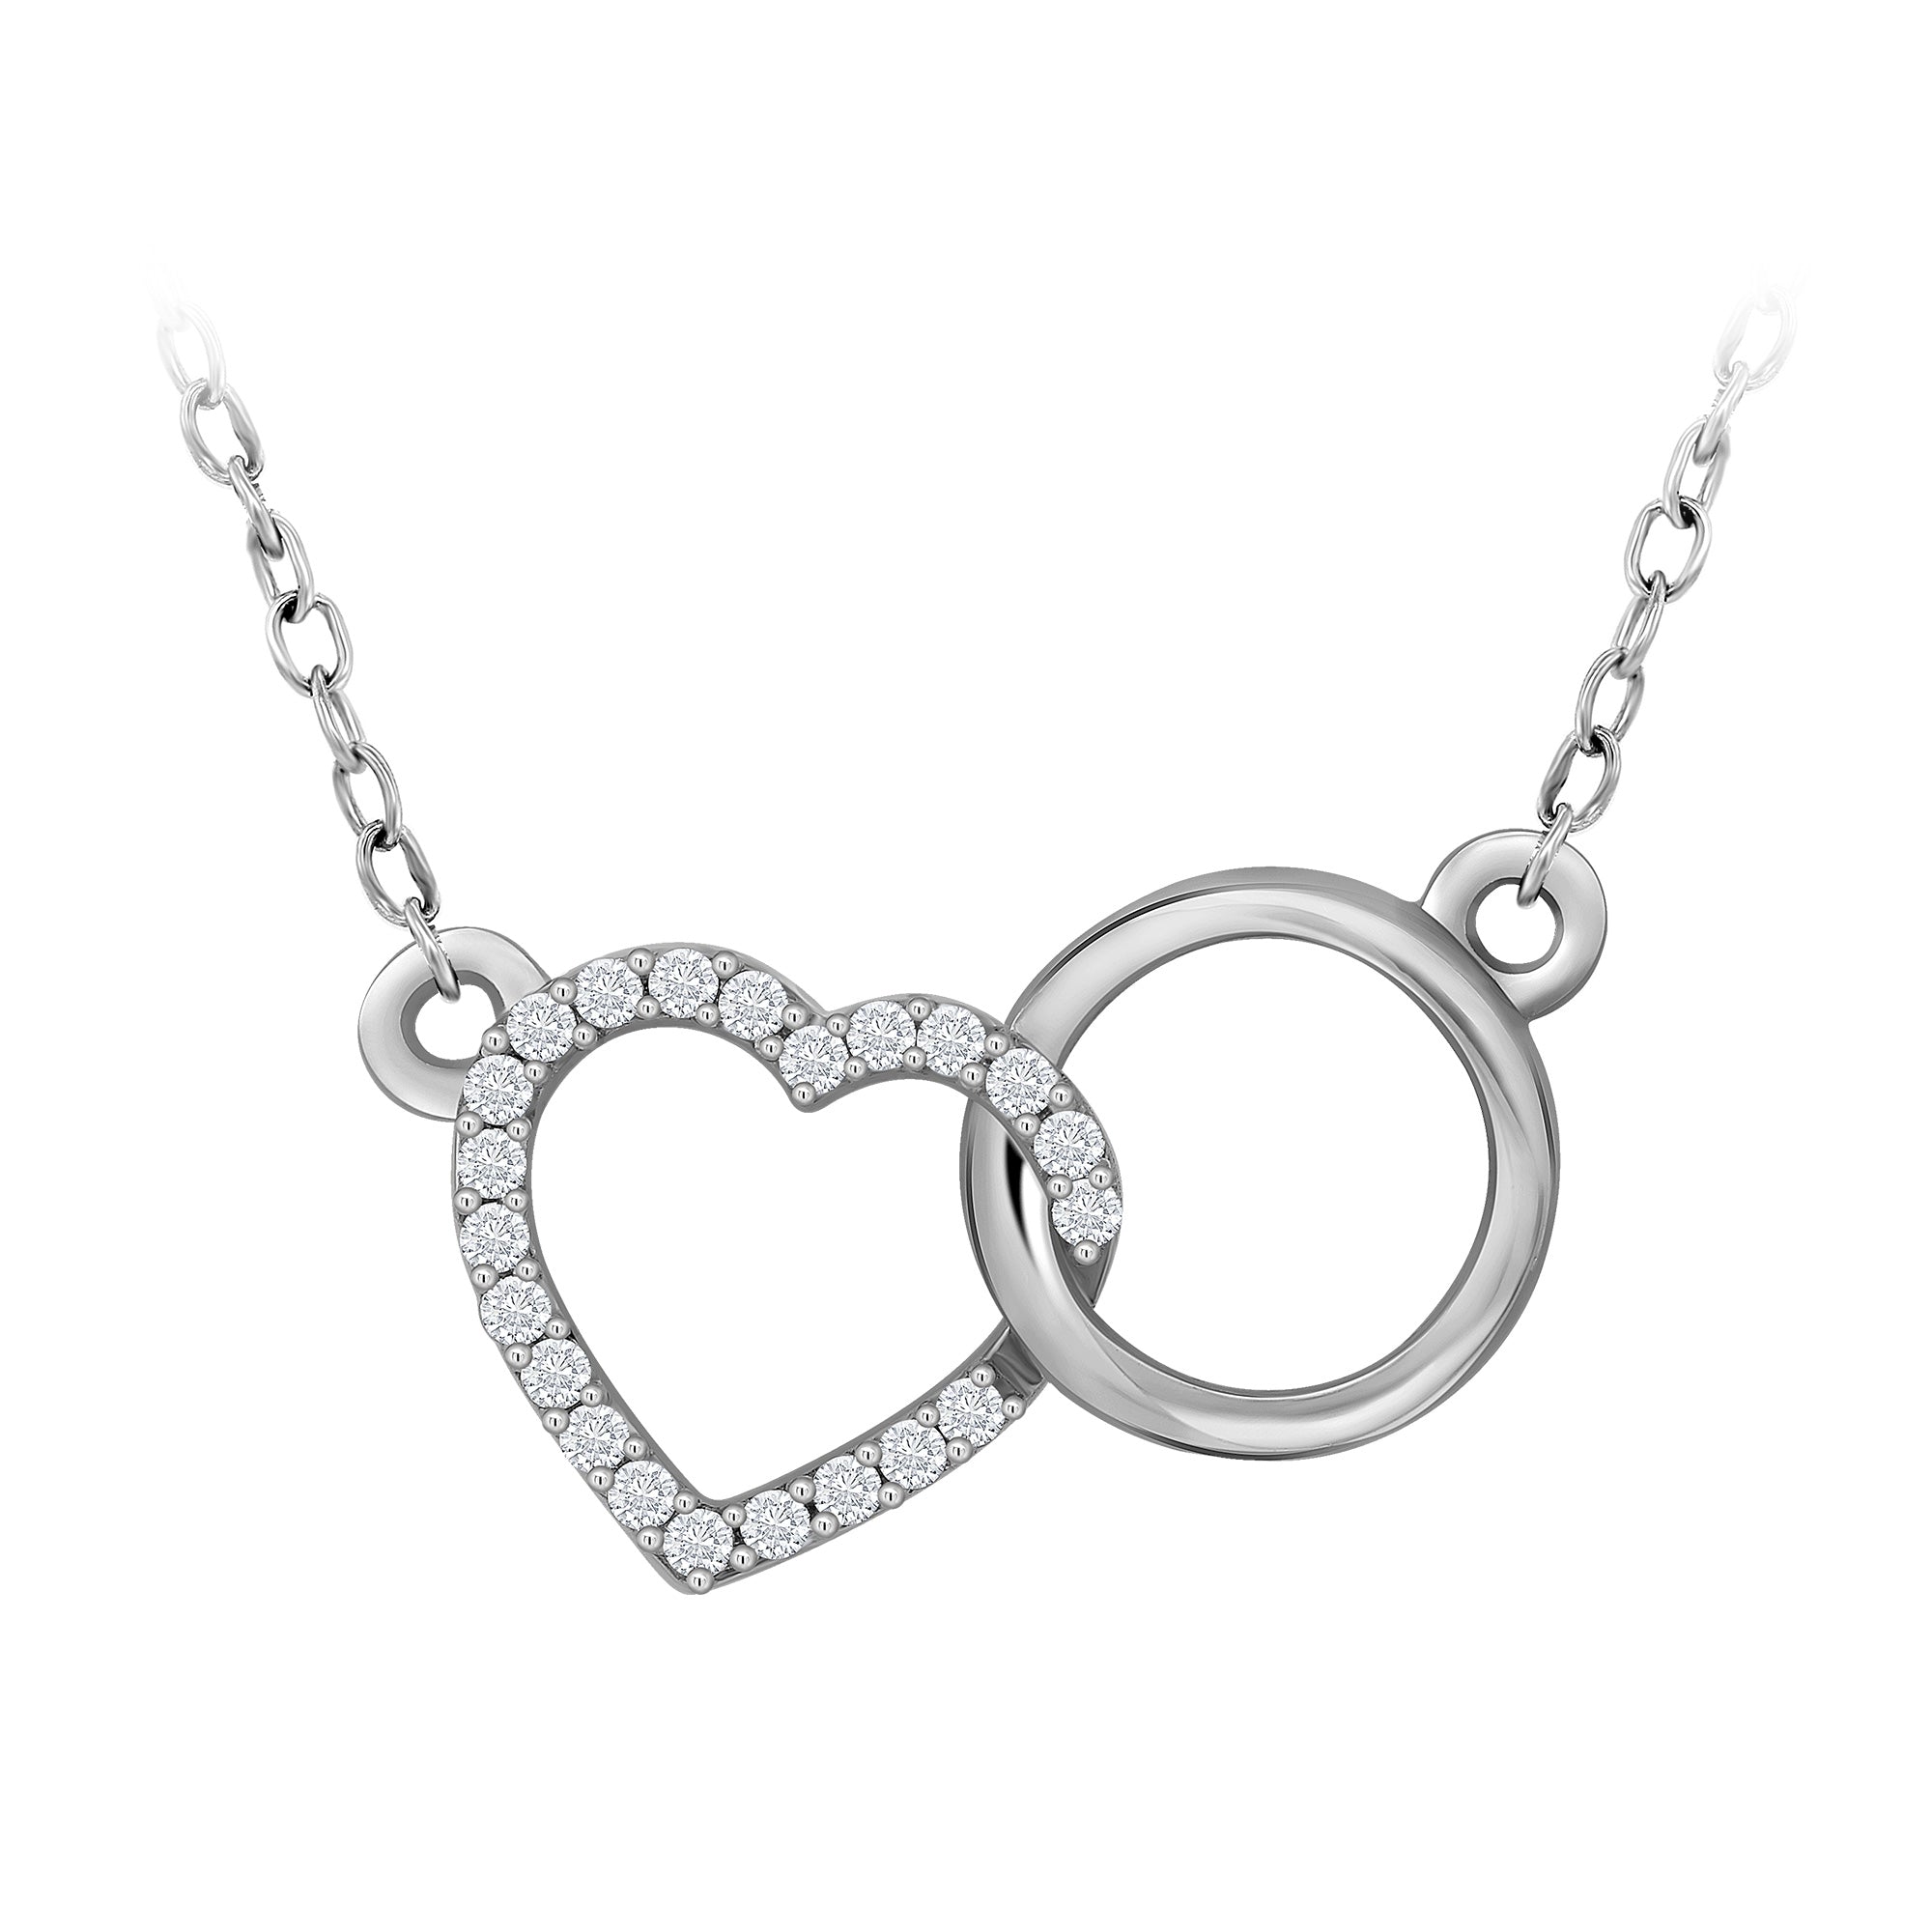 9ct white gold diamond set heart & plain circle pendant with 18" chain (included) 0.11ct